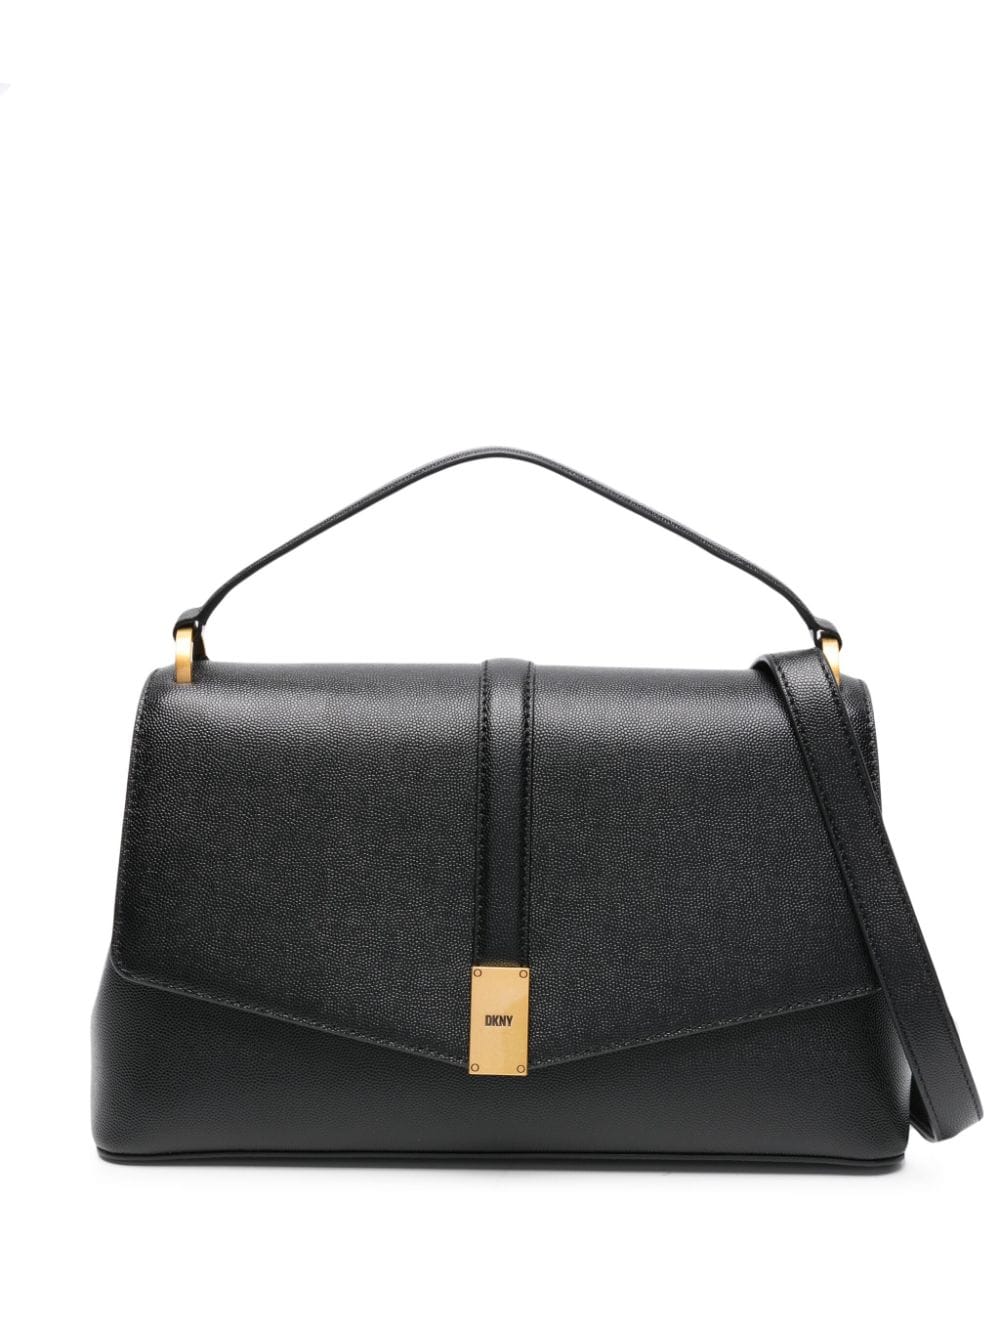 Dkny Conner Leather Tote Bag In Black